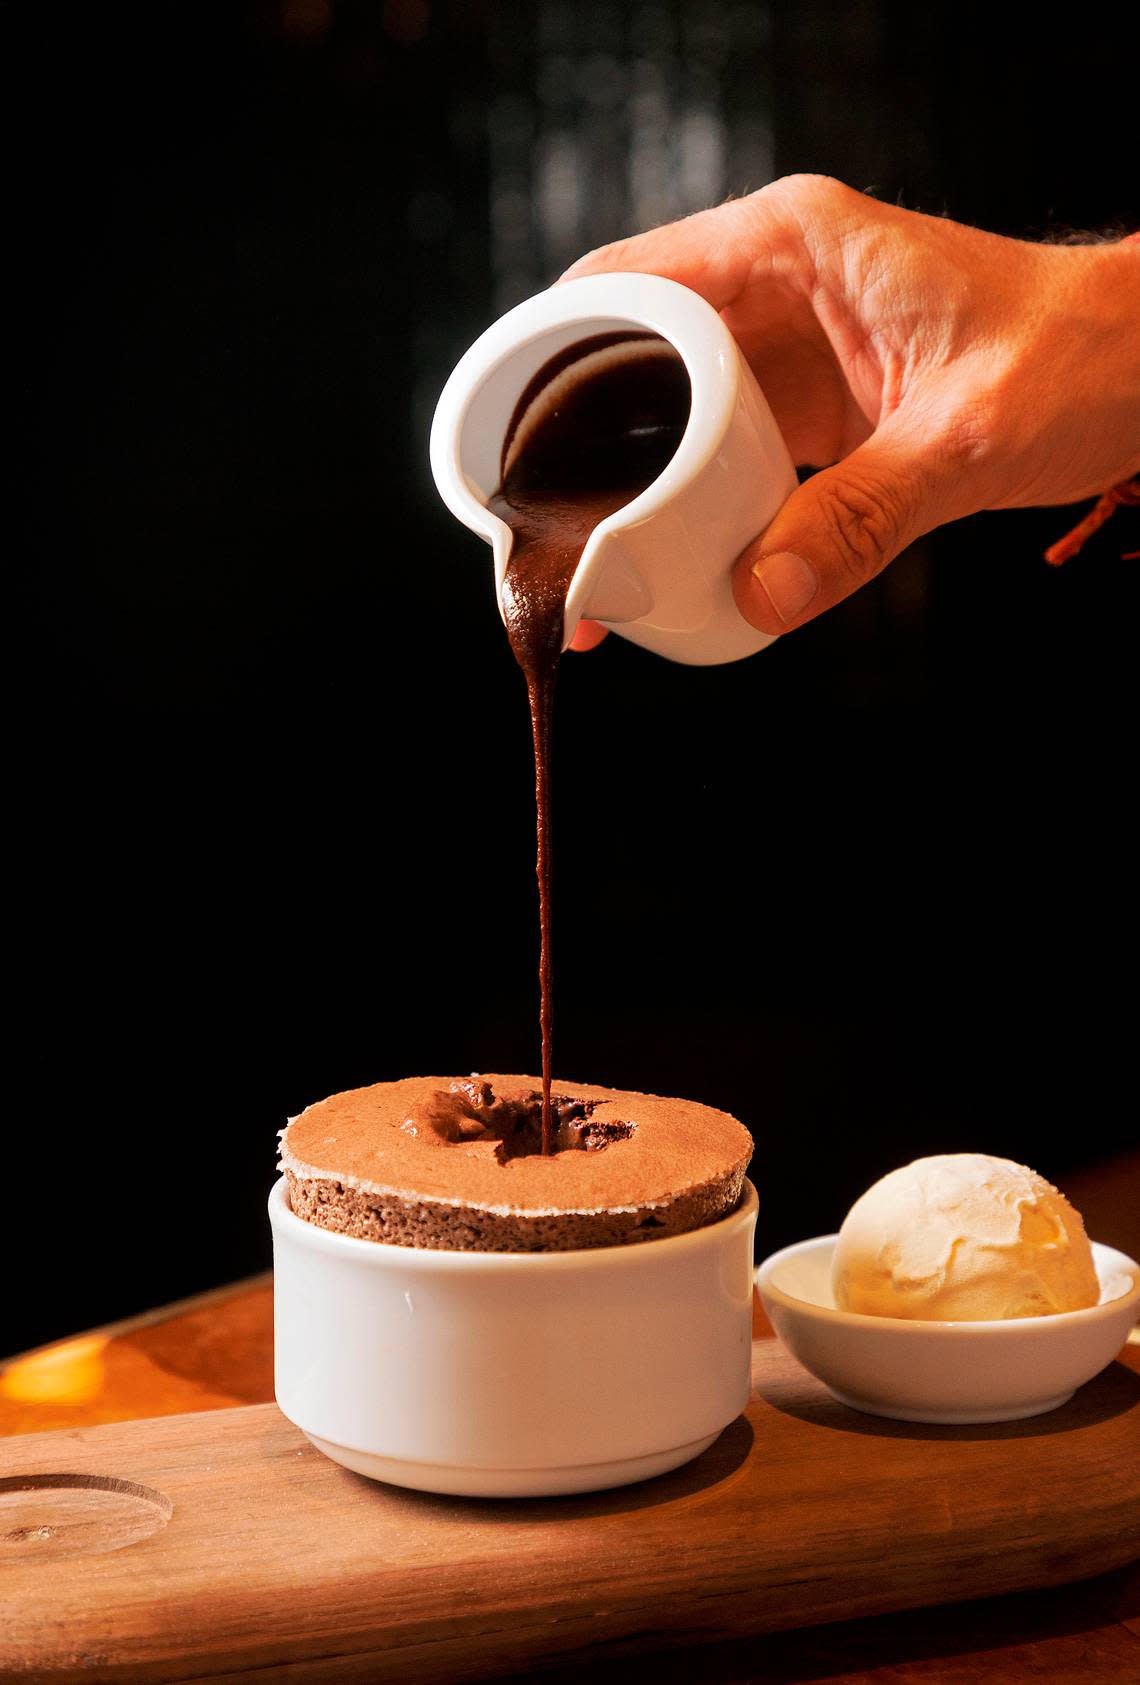 Hot fudge is poured into a hot chocolate soufflé, served alongside bourbon caramel ice cream at Nanas on Wednesday, Nov. 22, 2023, in Durham, N.C.